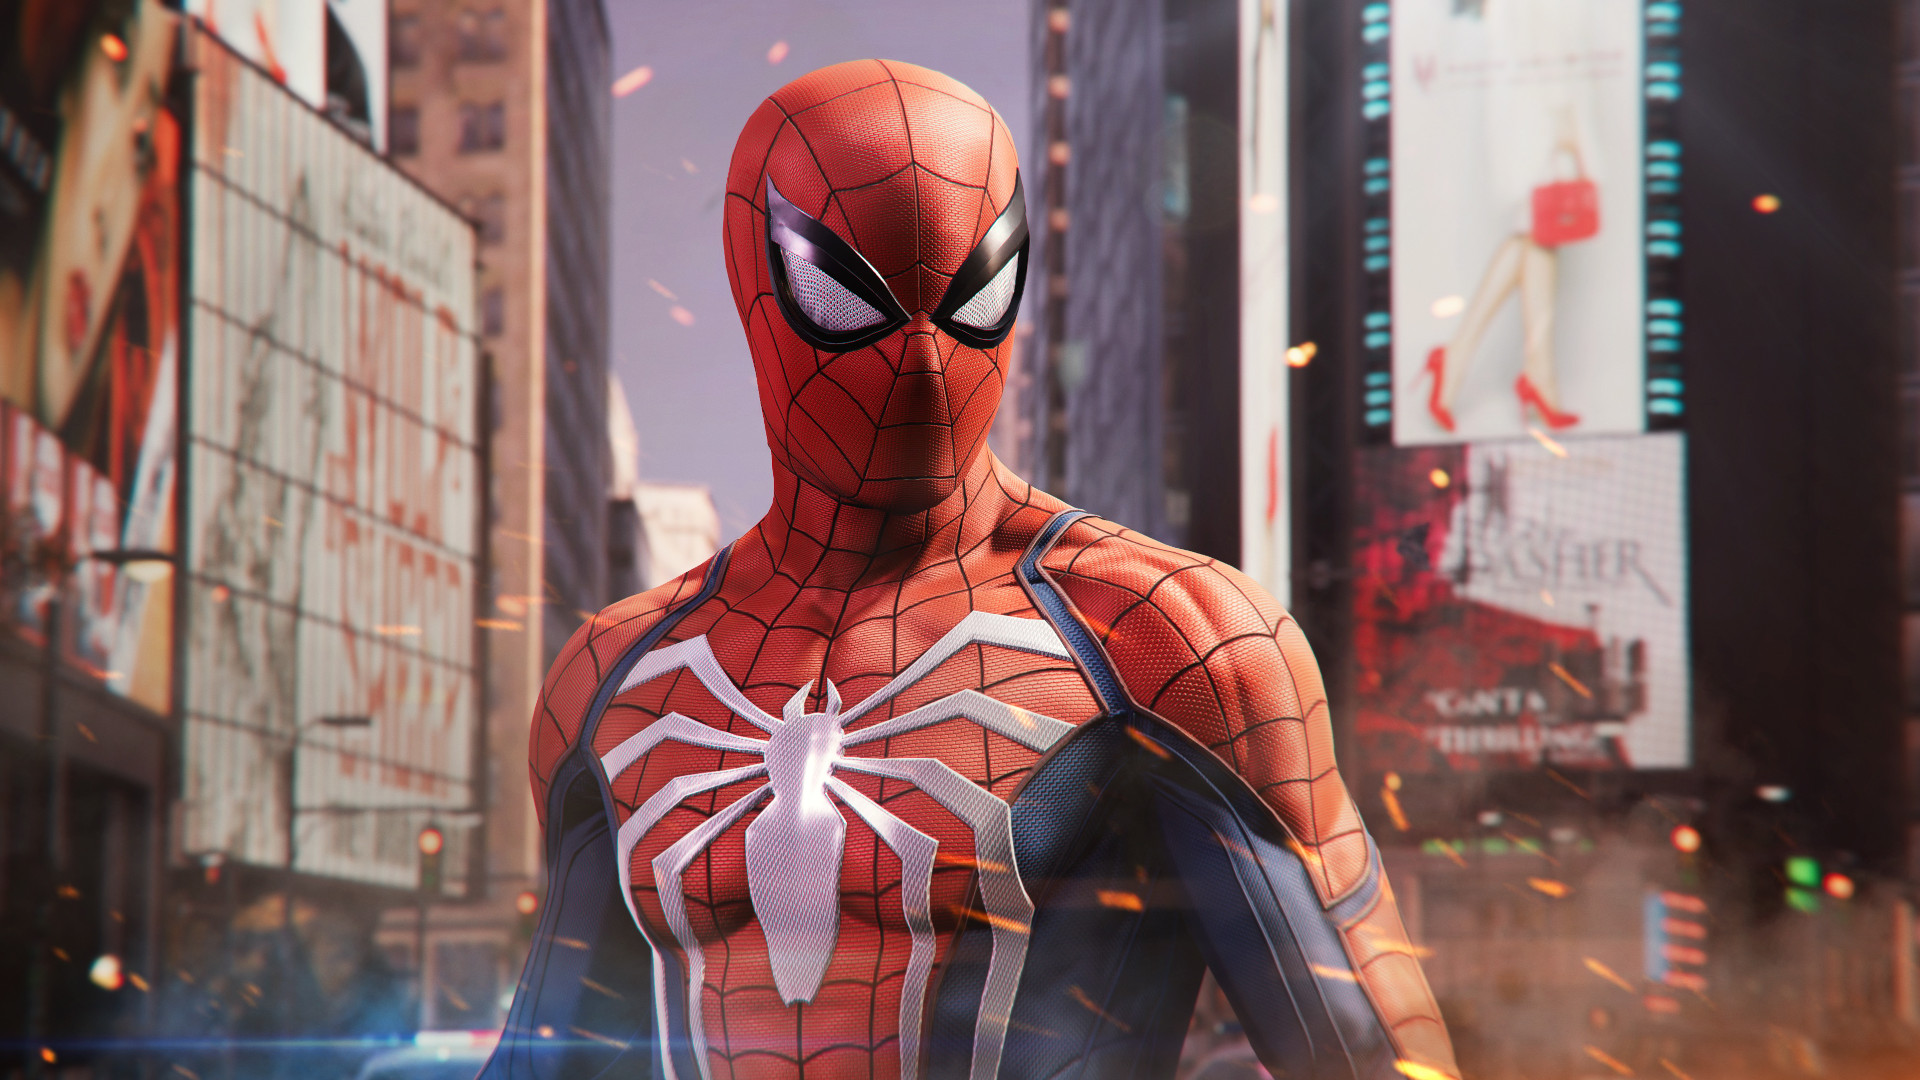 Marvel's Spider-Man Remastered PC review in progress